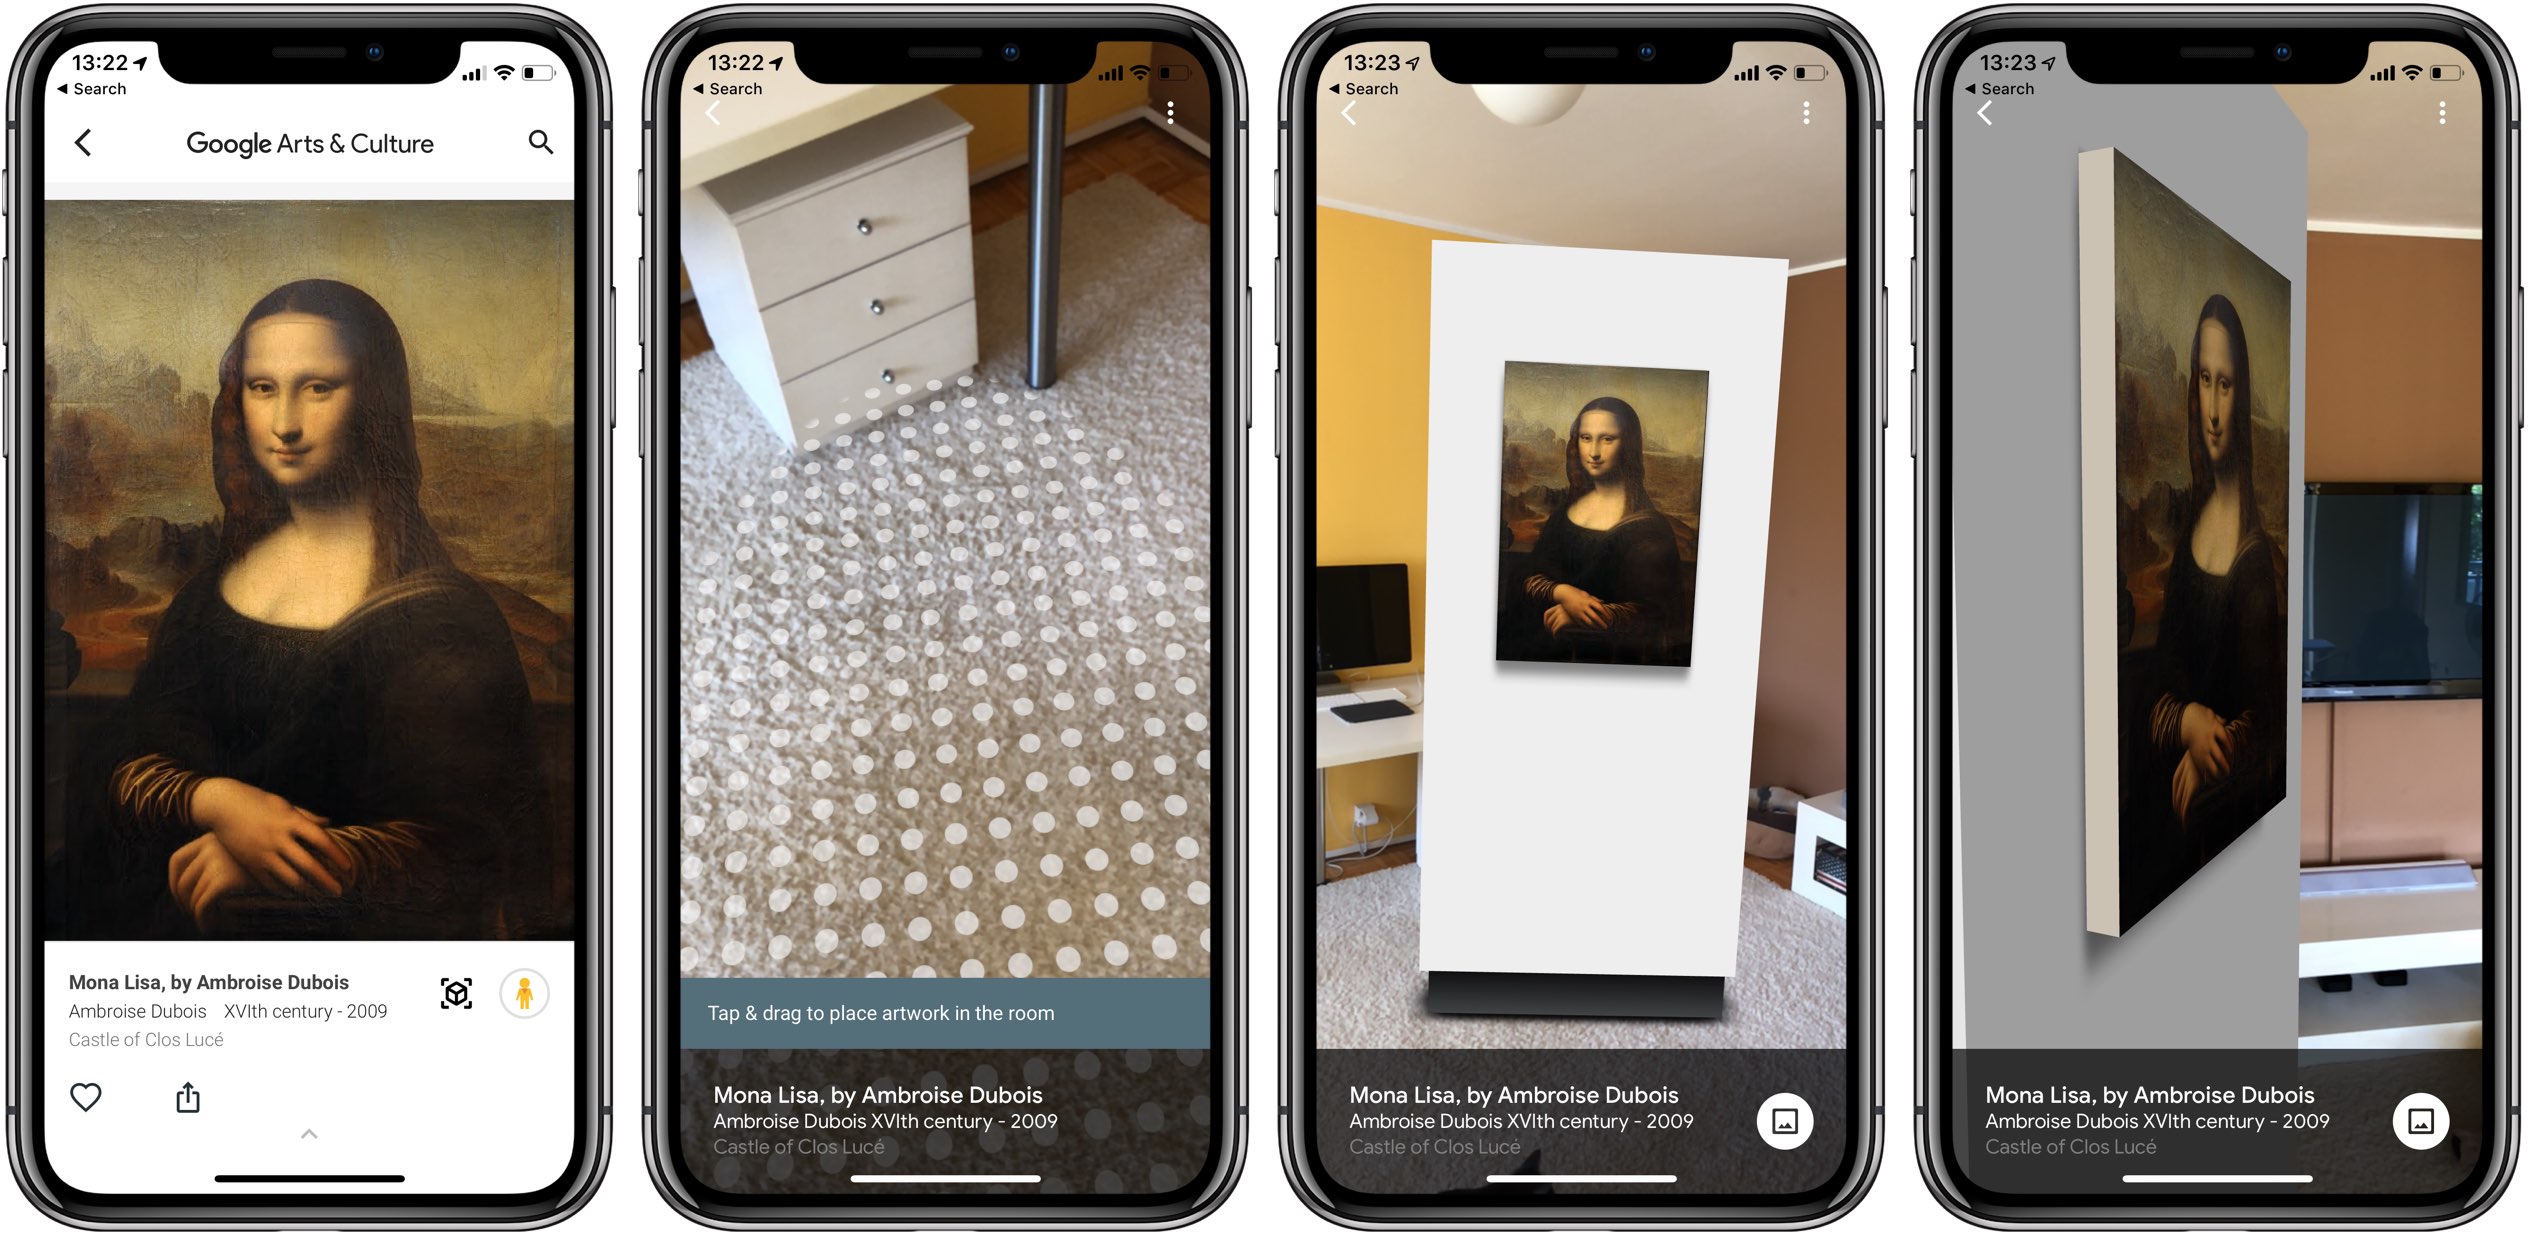 Google’s updated Arts & Culture app now lets you explore real-size paintings and artworks in augmented reality